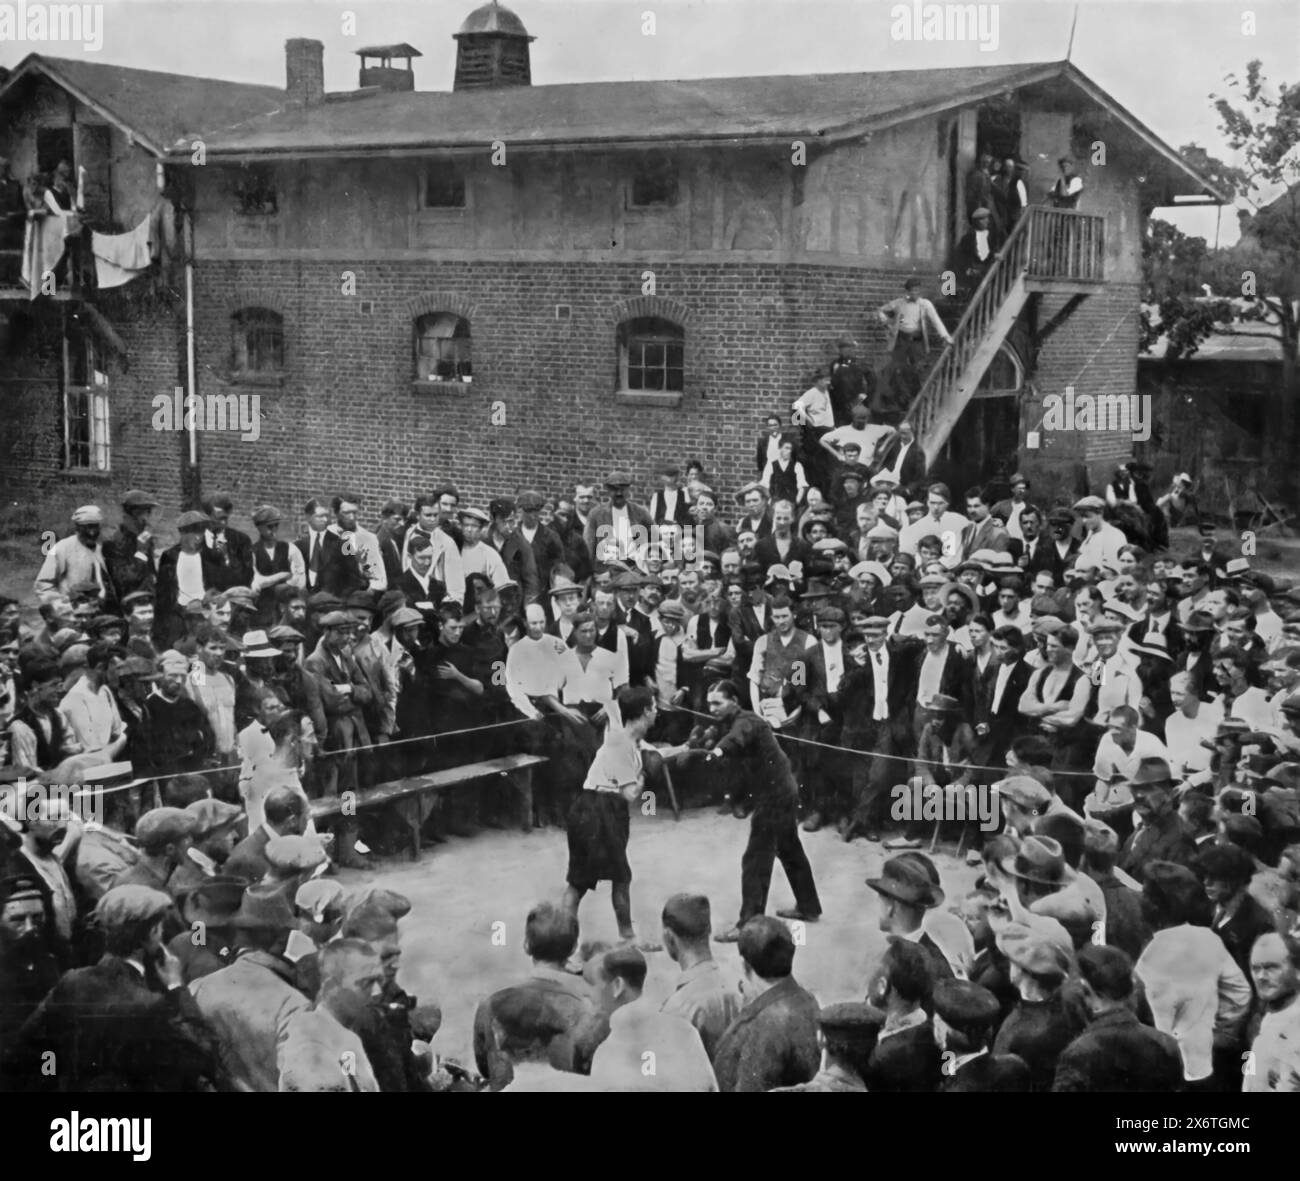 A photograph of a boxing match in the civilian internment camp at Ruhleben, Berlin, during the First World War, circa 1916. The camp housed mainly British civilians who were in Germany at the outbreak of the war. Facing tough conditions and harsh winters, the captives sought every available means of mental and physical recreation to endure their captivity. This scene highlights the resilience and determination to maintain their morale and well-being despite the challenges they faced. Stock Photo